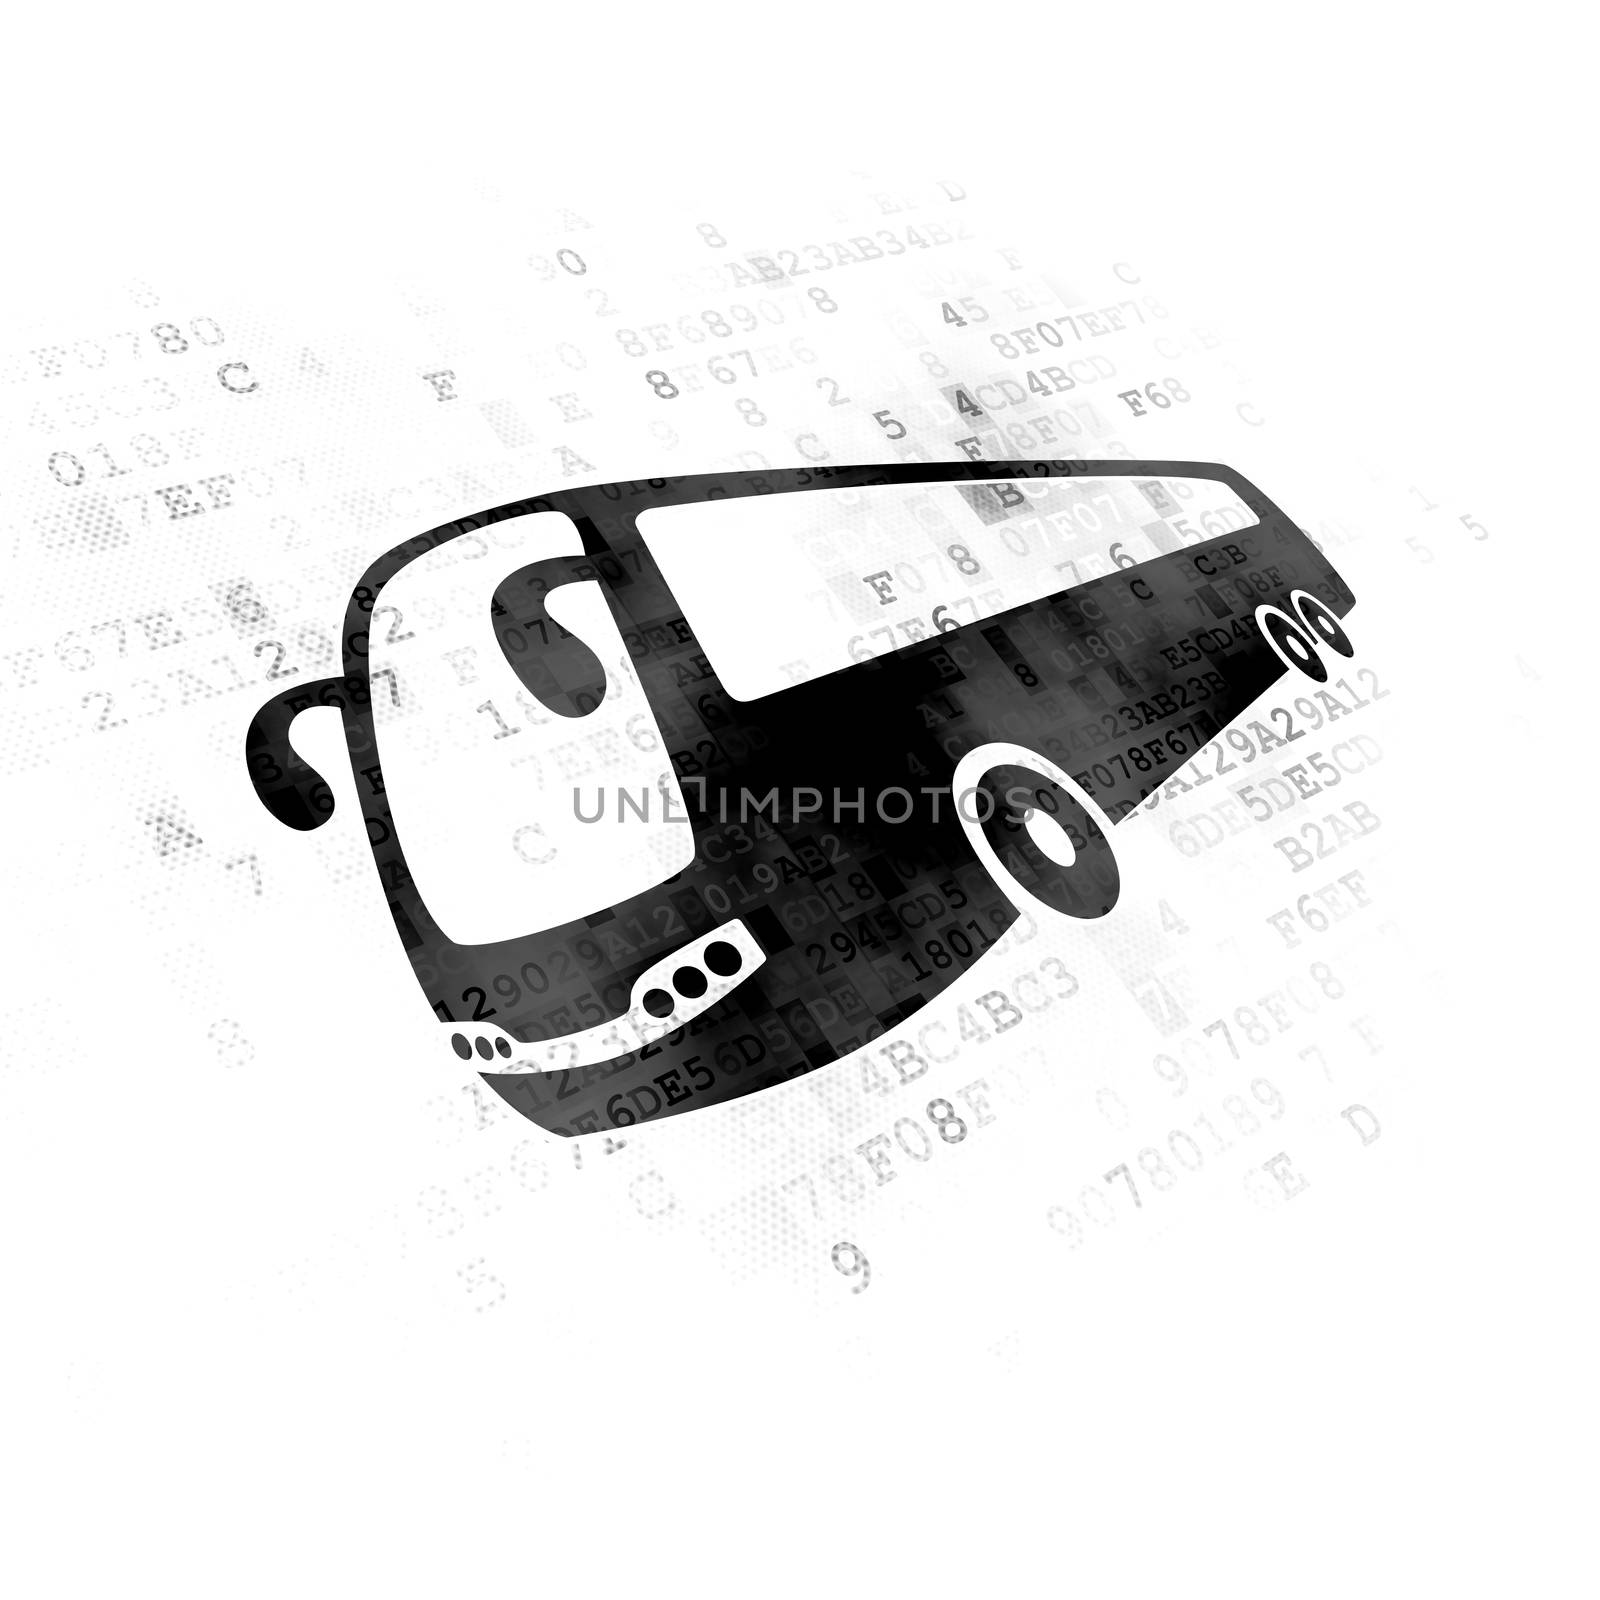 Vacation concept: Pixelated black Bus icon on Digital background